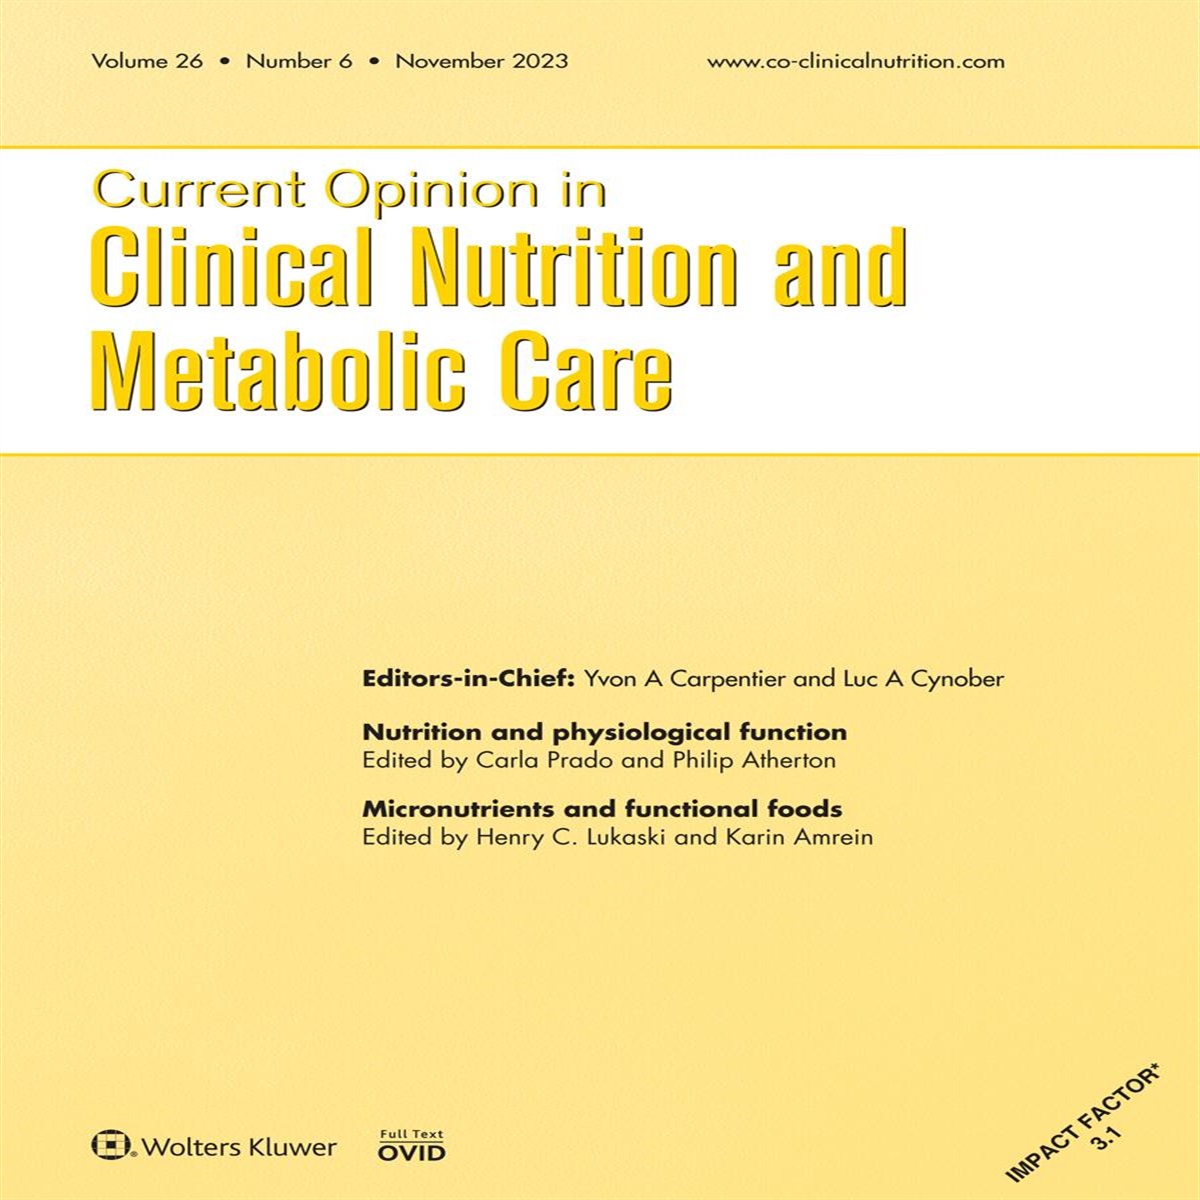 Editorial: micronutrients and functional foods